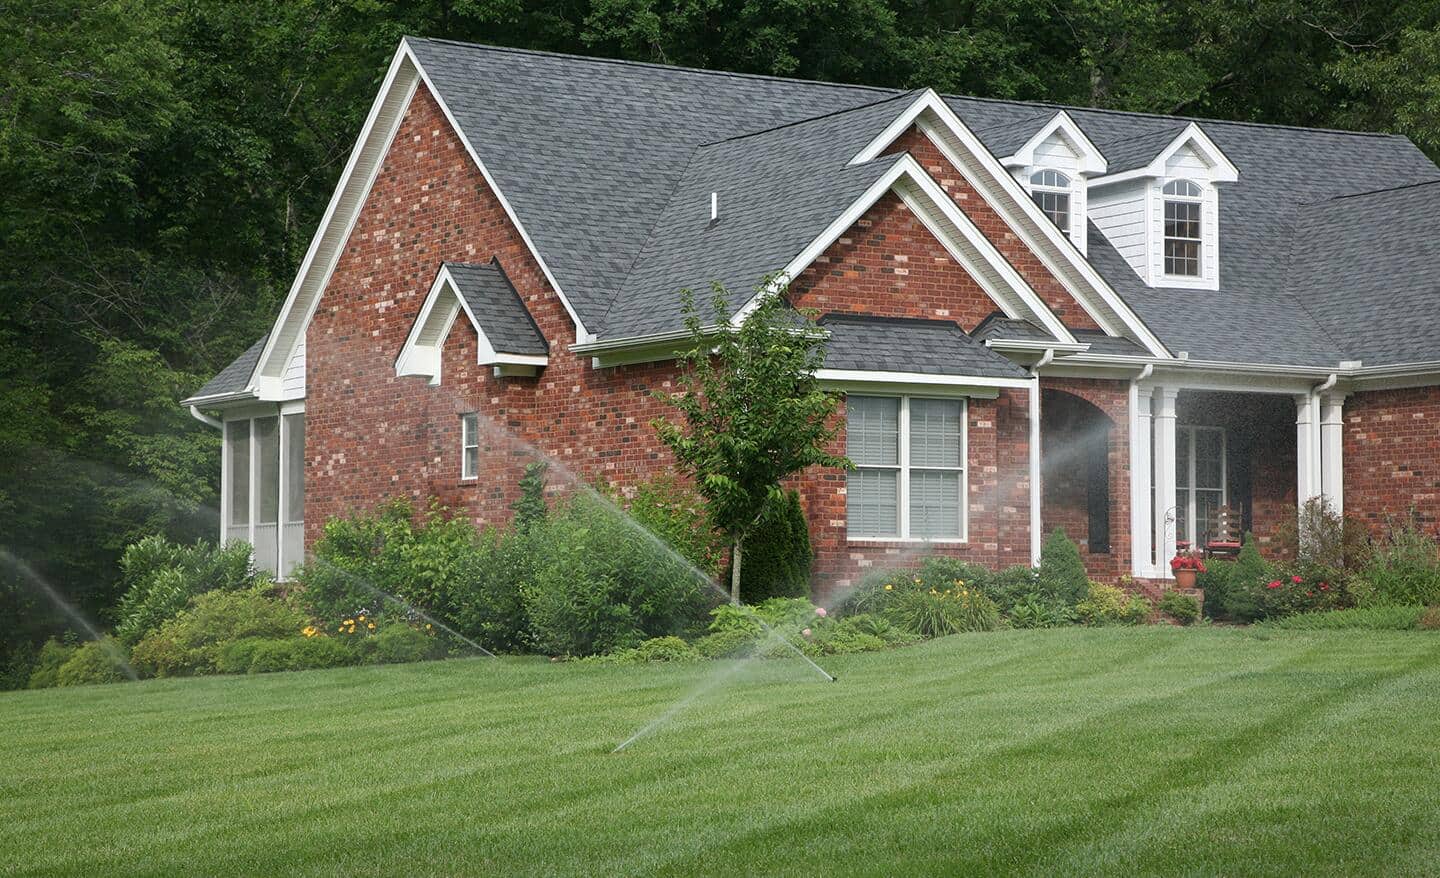 Sprinklers watering a healthy green lawn in front of a brick house